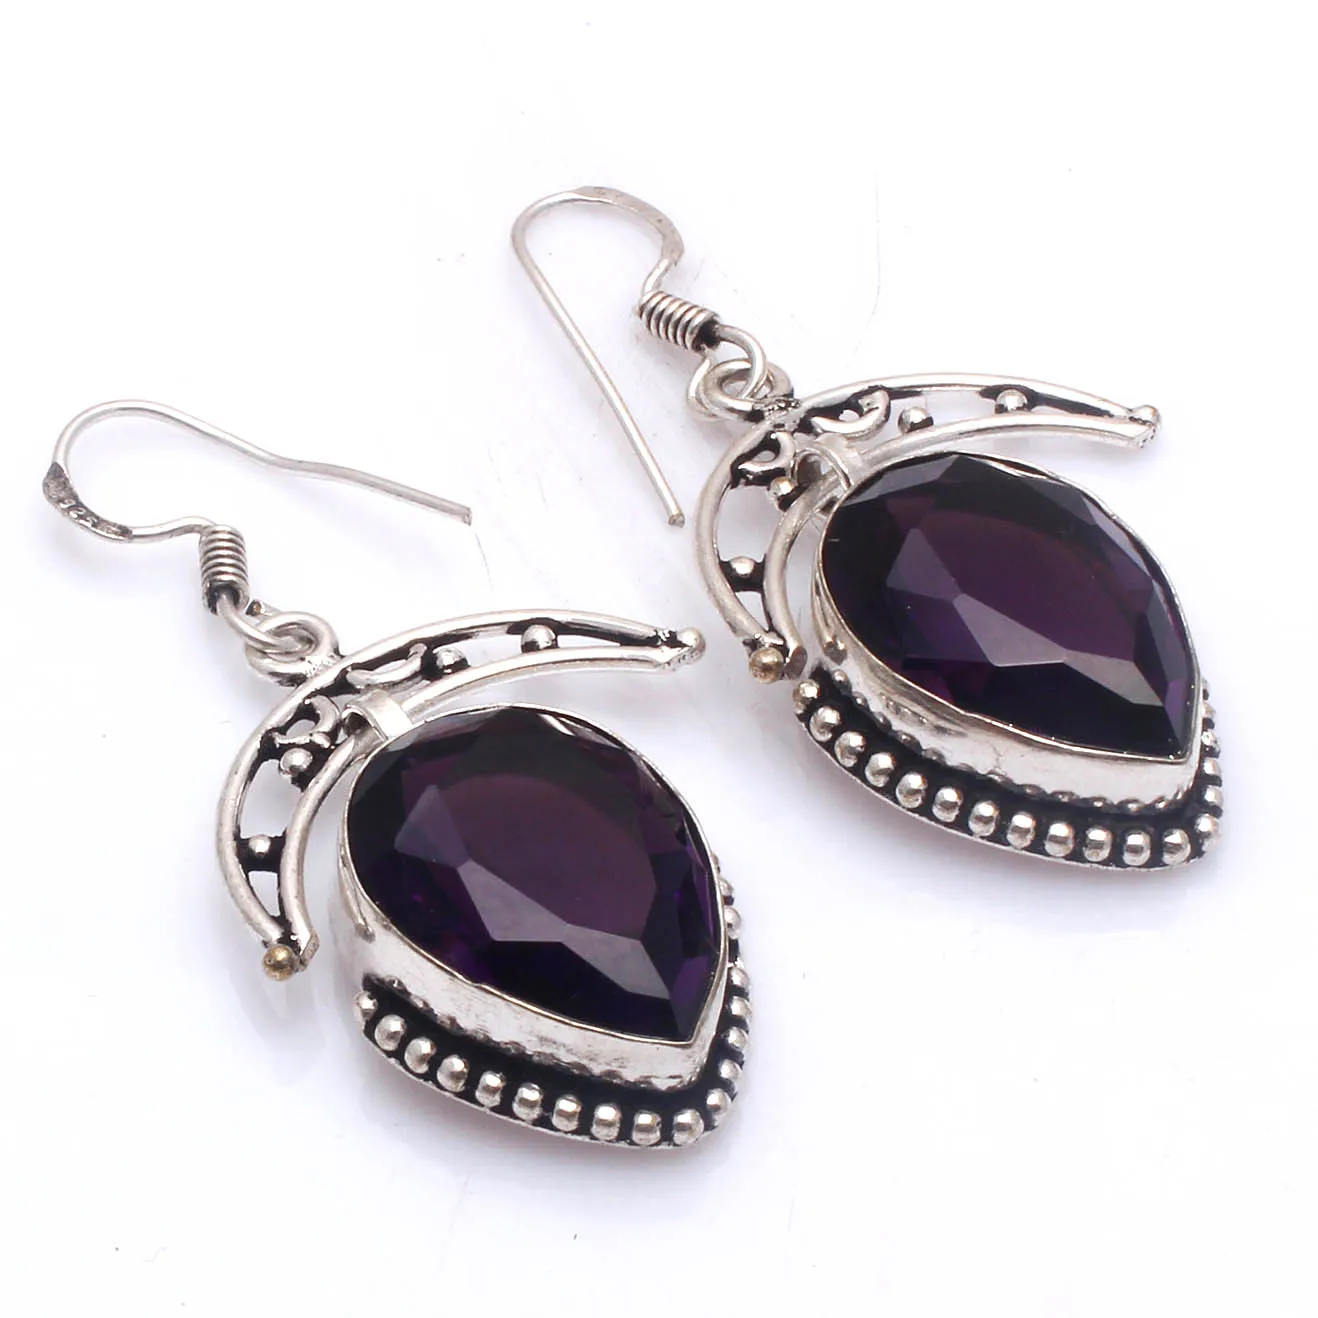 

Genuine Amethyst Silver Overlay on Copper Earrings ,Hand made Women Jewelry Gift , 50 mm, E5757